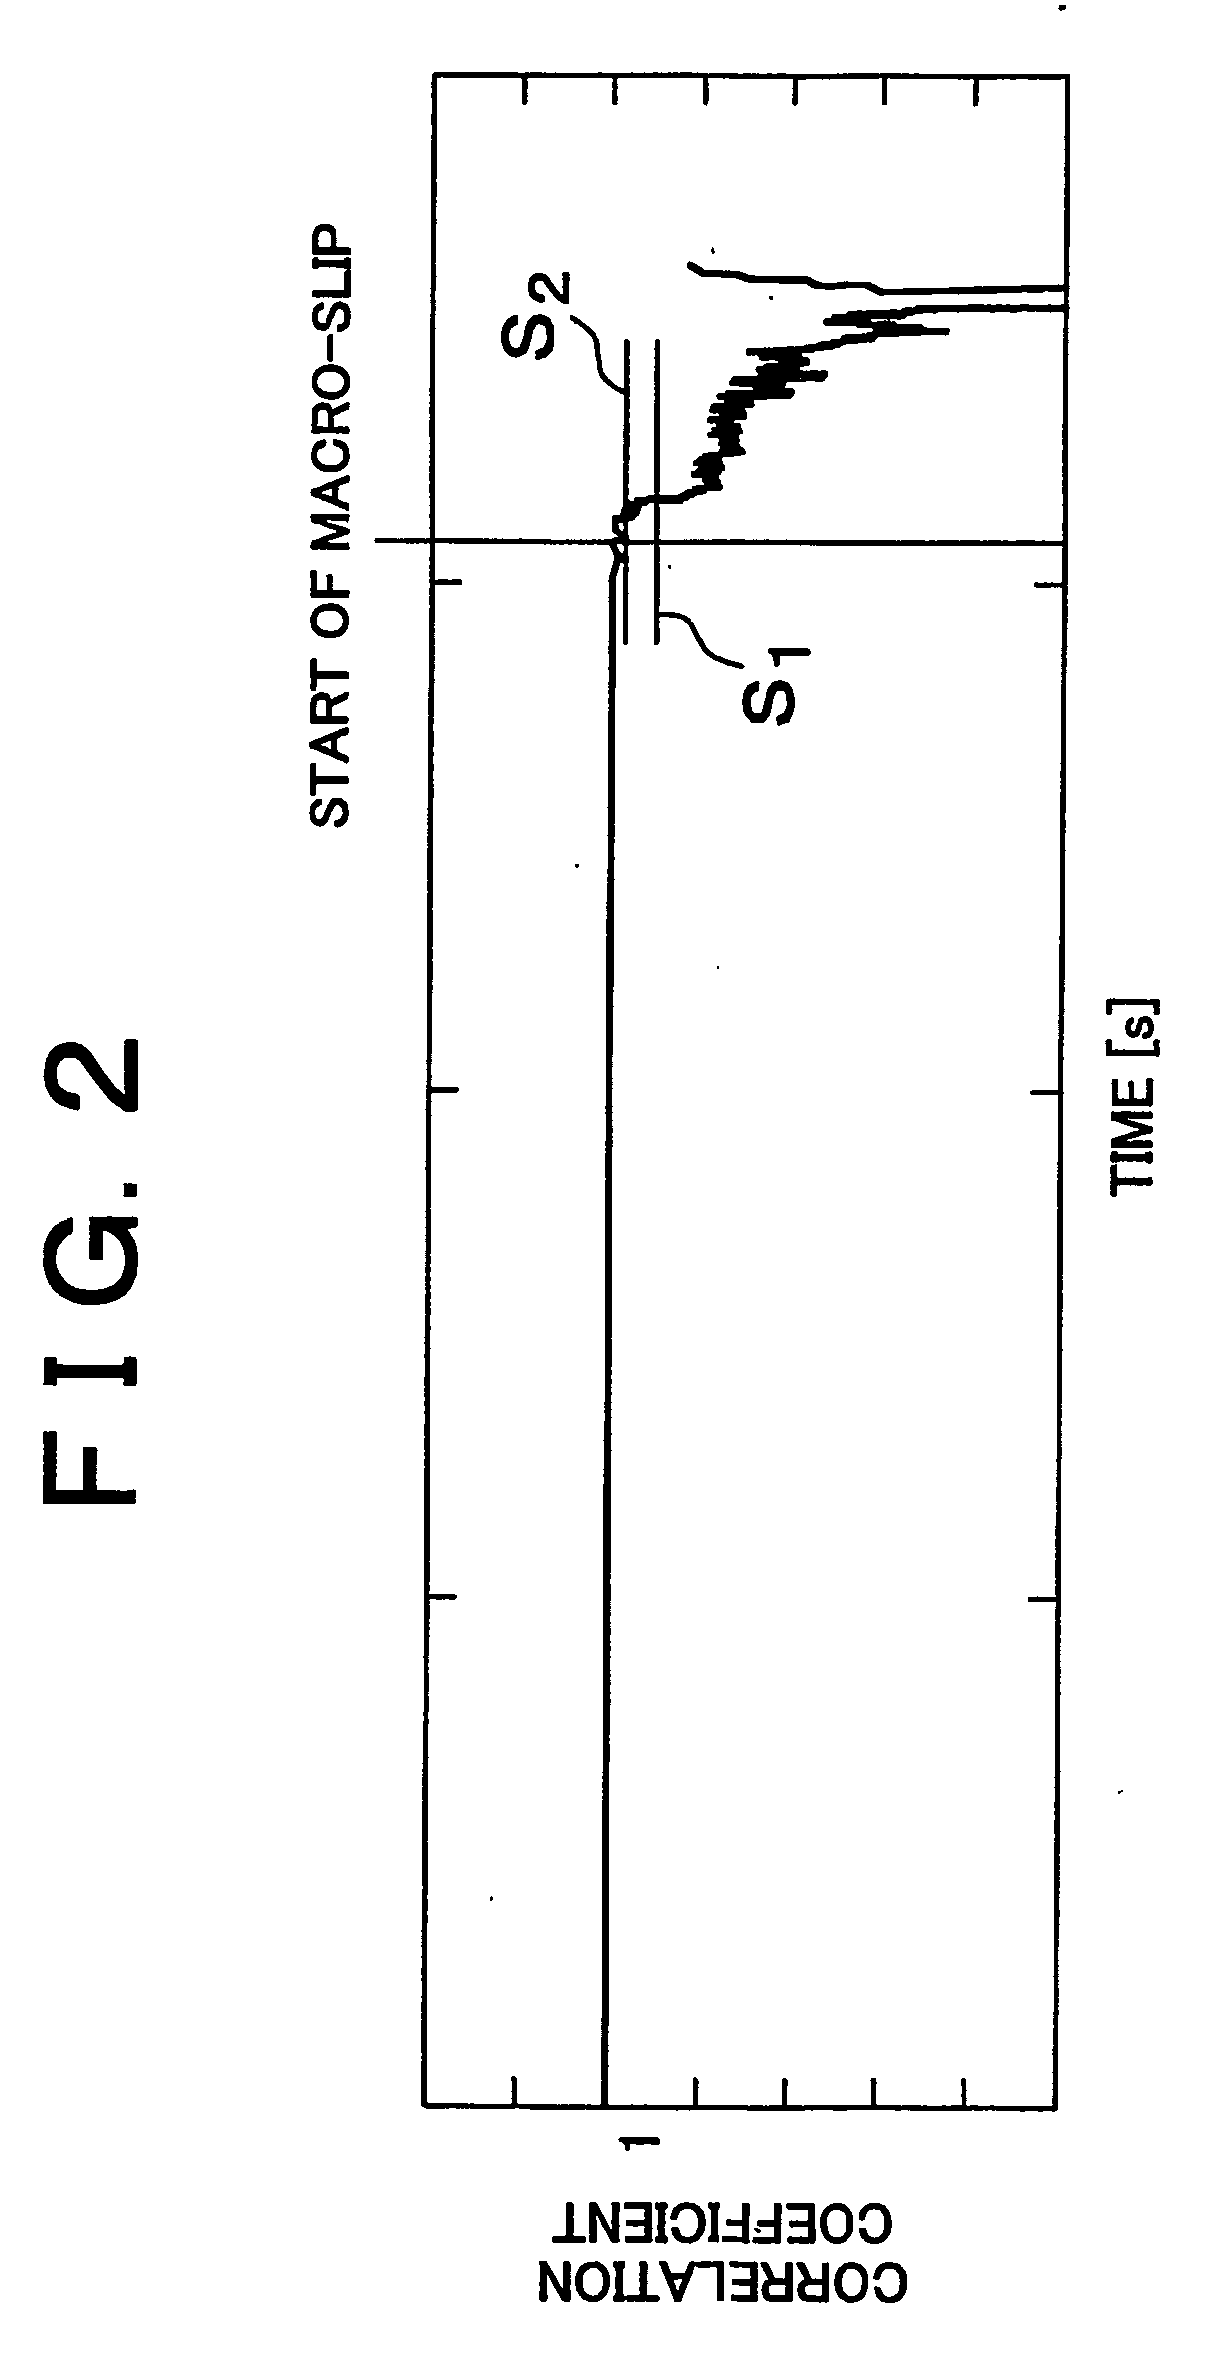 Slippage detection system and method for continously variable transmutations